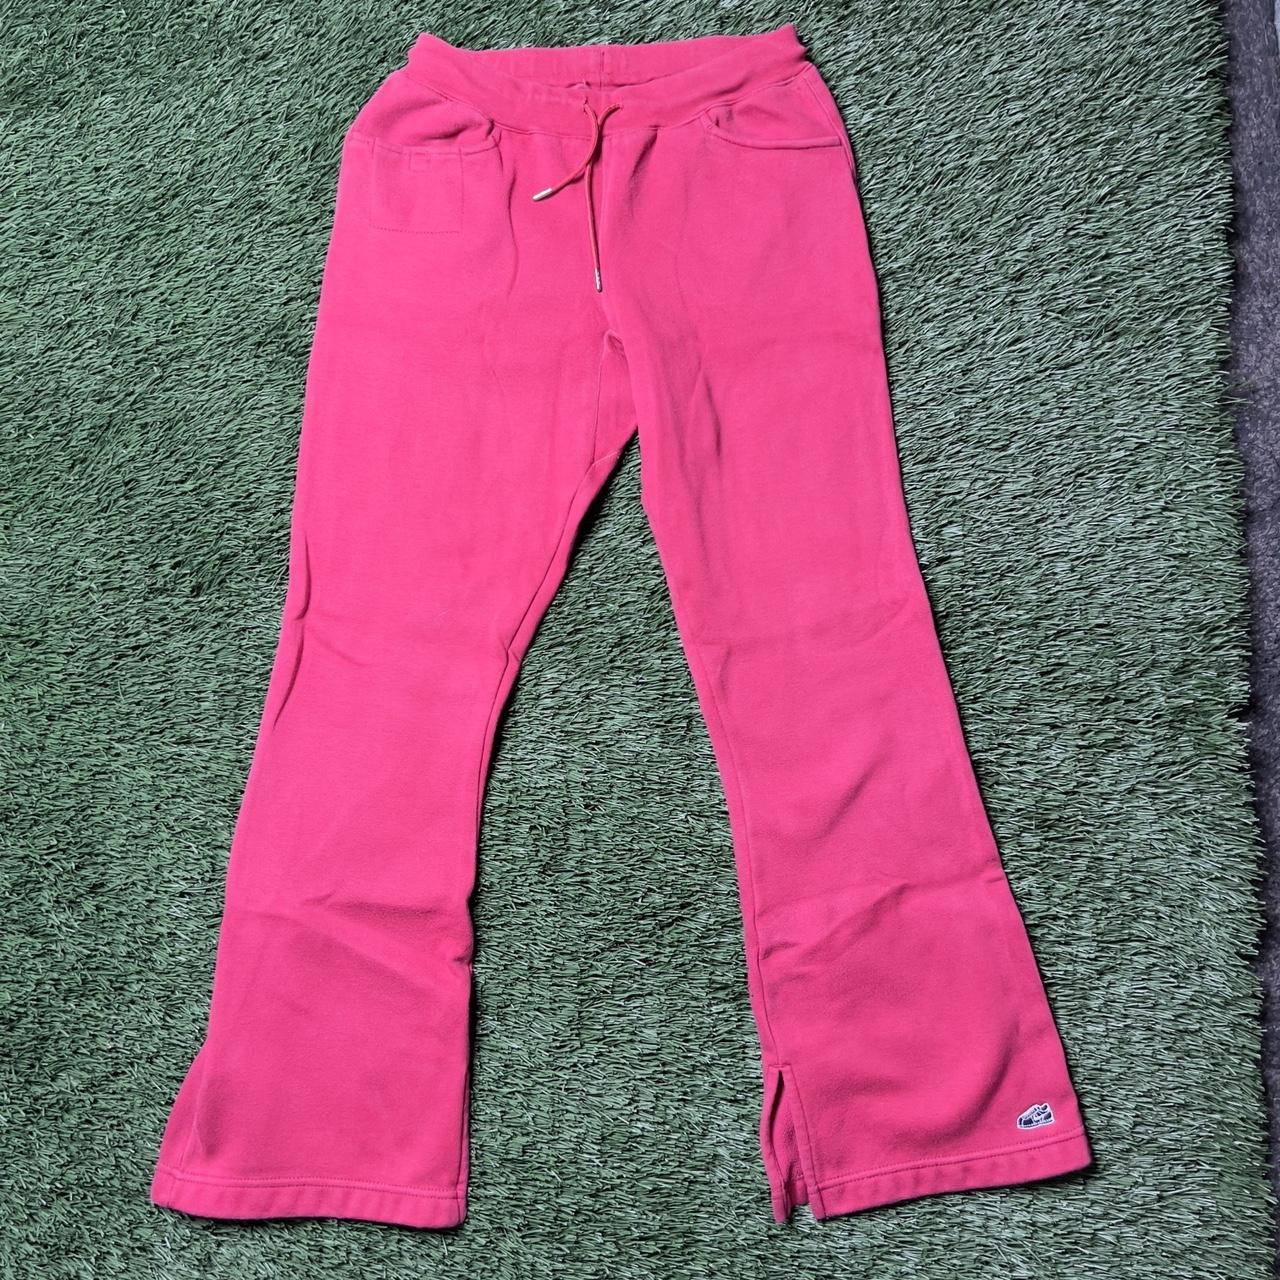 Nike Pink and Blue Joggers-tracksuits | Depop